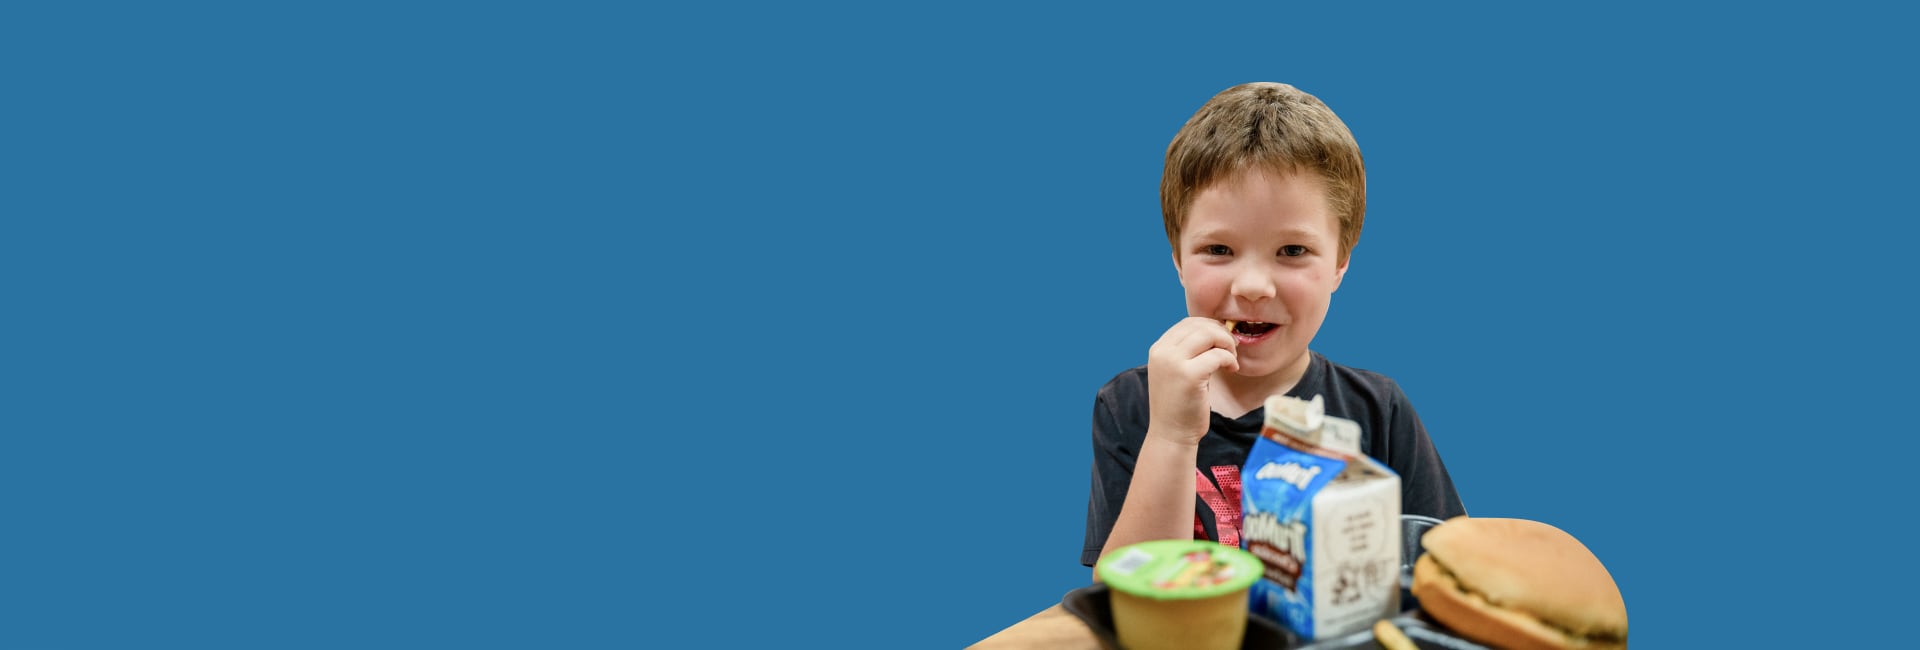 A boy with food in front of a blue background